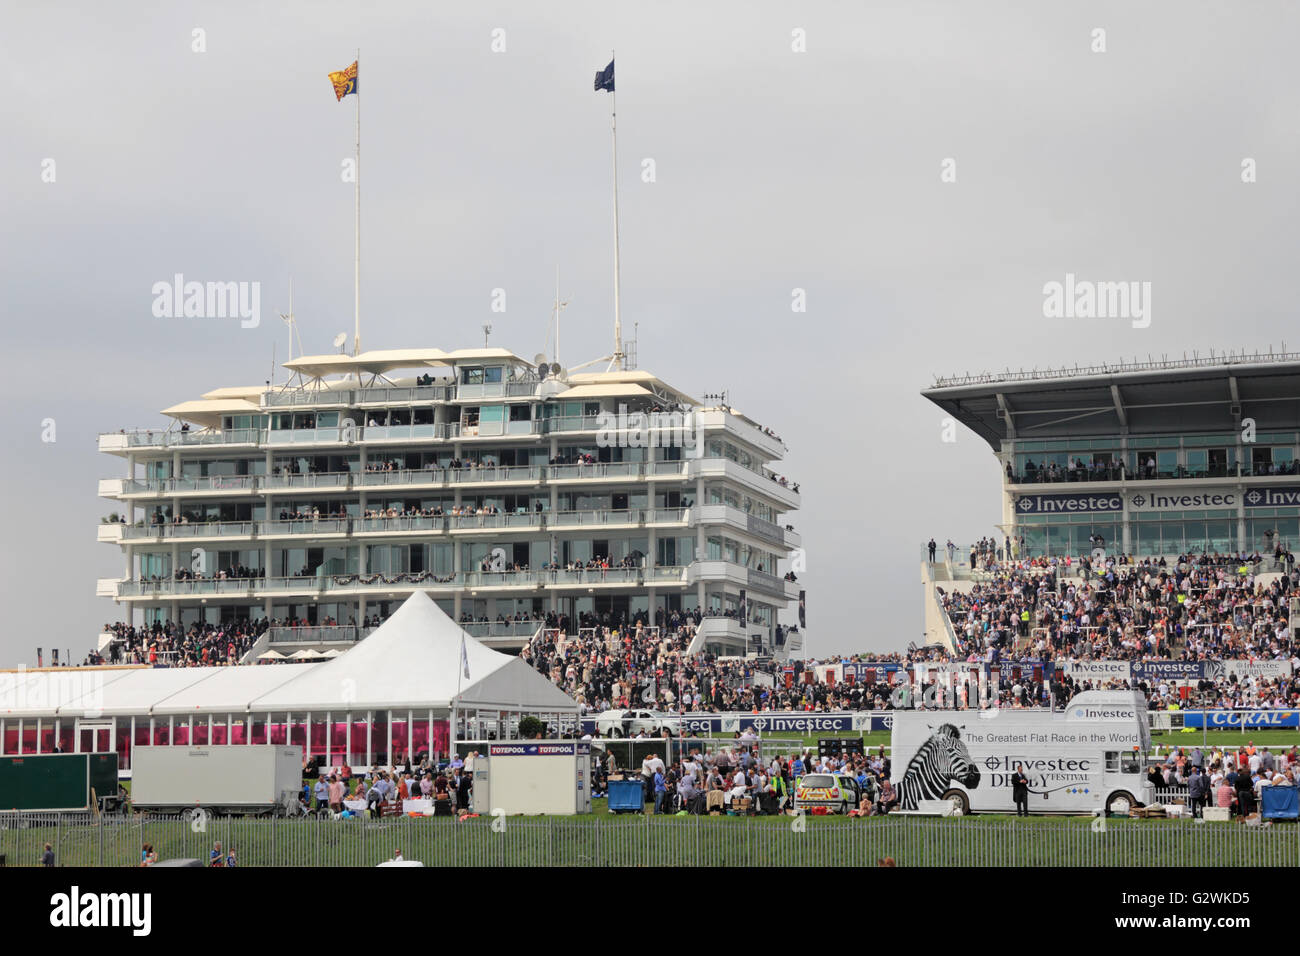 Epsom Downs, Surrey, England, UK. 4th June 2016. Derby Day at Epsom Downs race course, where the world famous flat race the Investec Derby is the main race of the day. Stock Photo